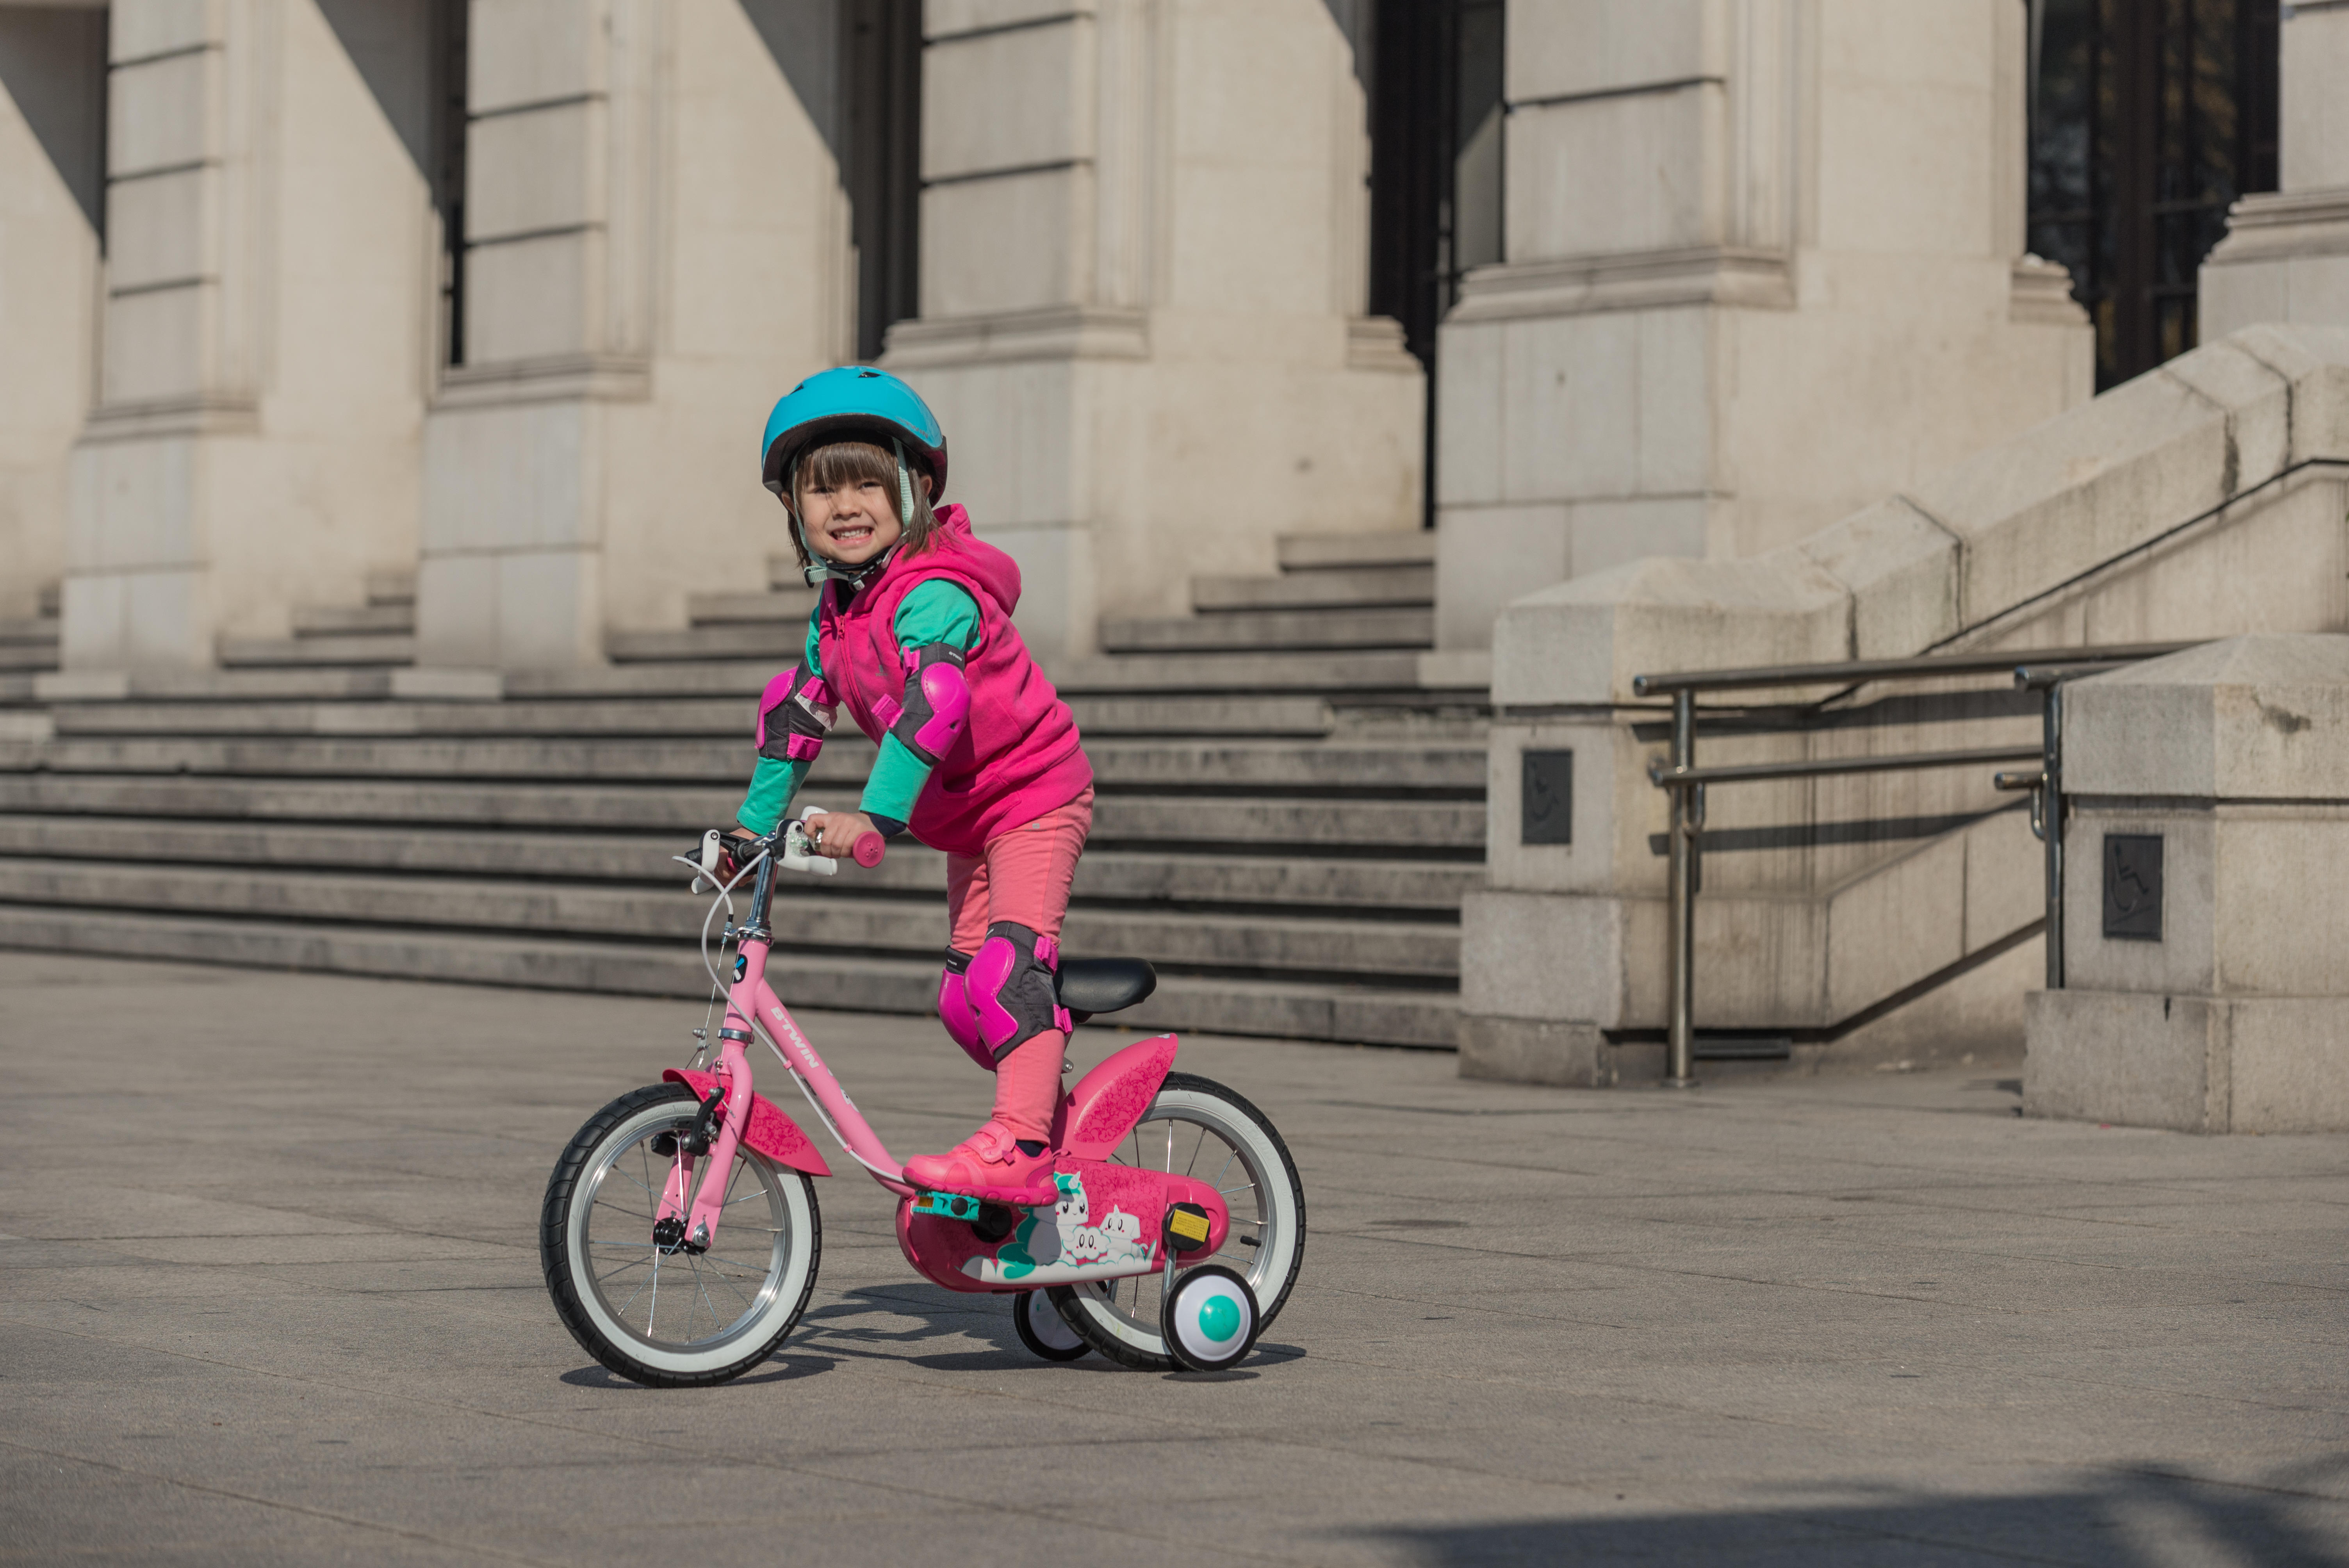 Buy Kids Learning Bikes 14 inch 3-5 Years Old Online @ Best Prices | Decathlon  Singapore